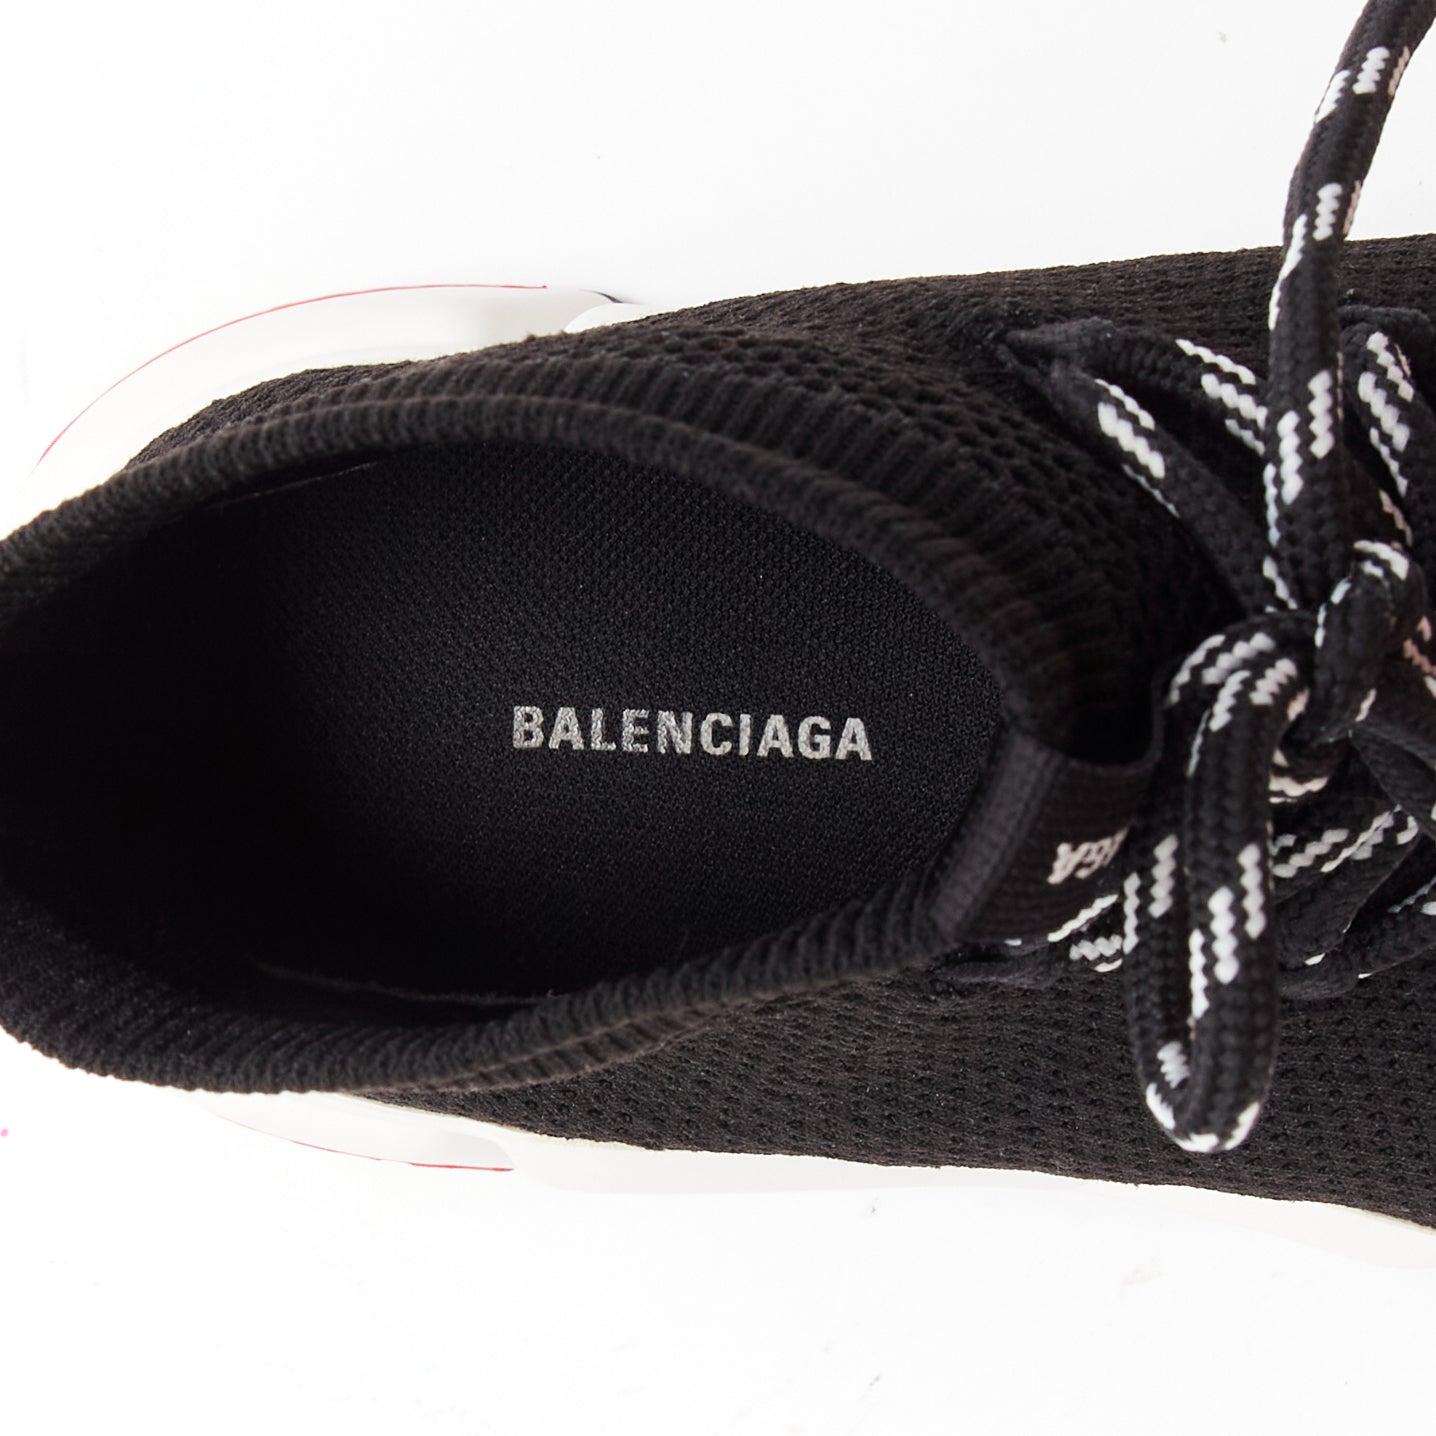 BALENCIAGA Speed black white red logo laced sock sneakers EU40 For Sale 5